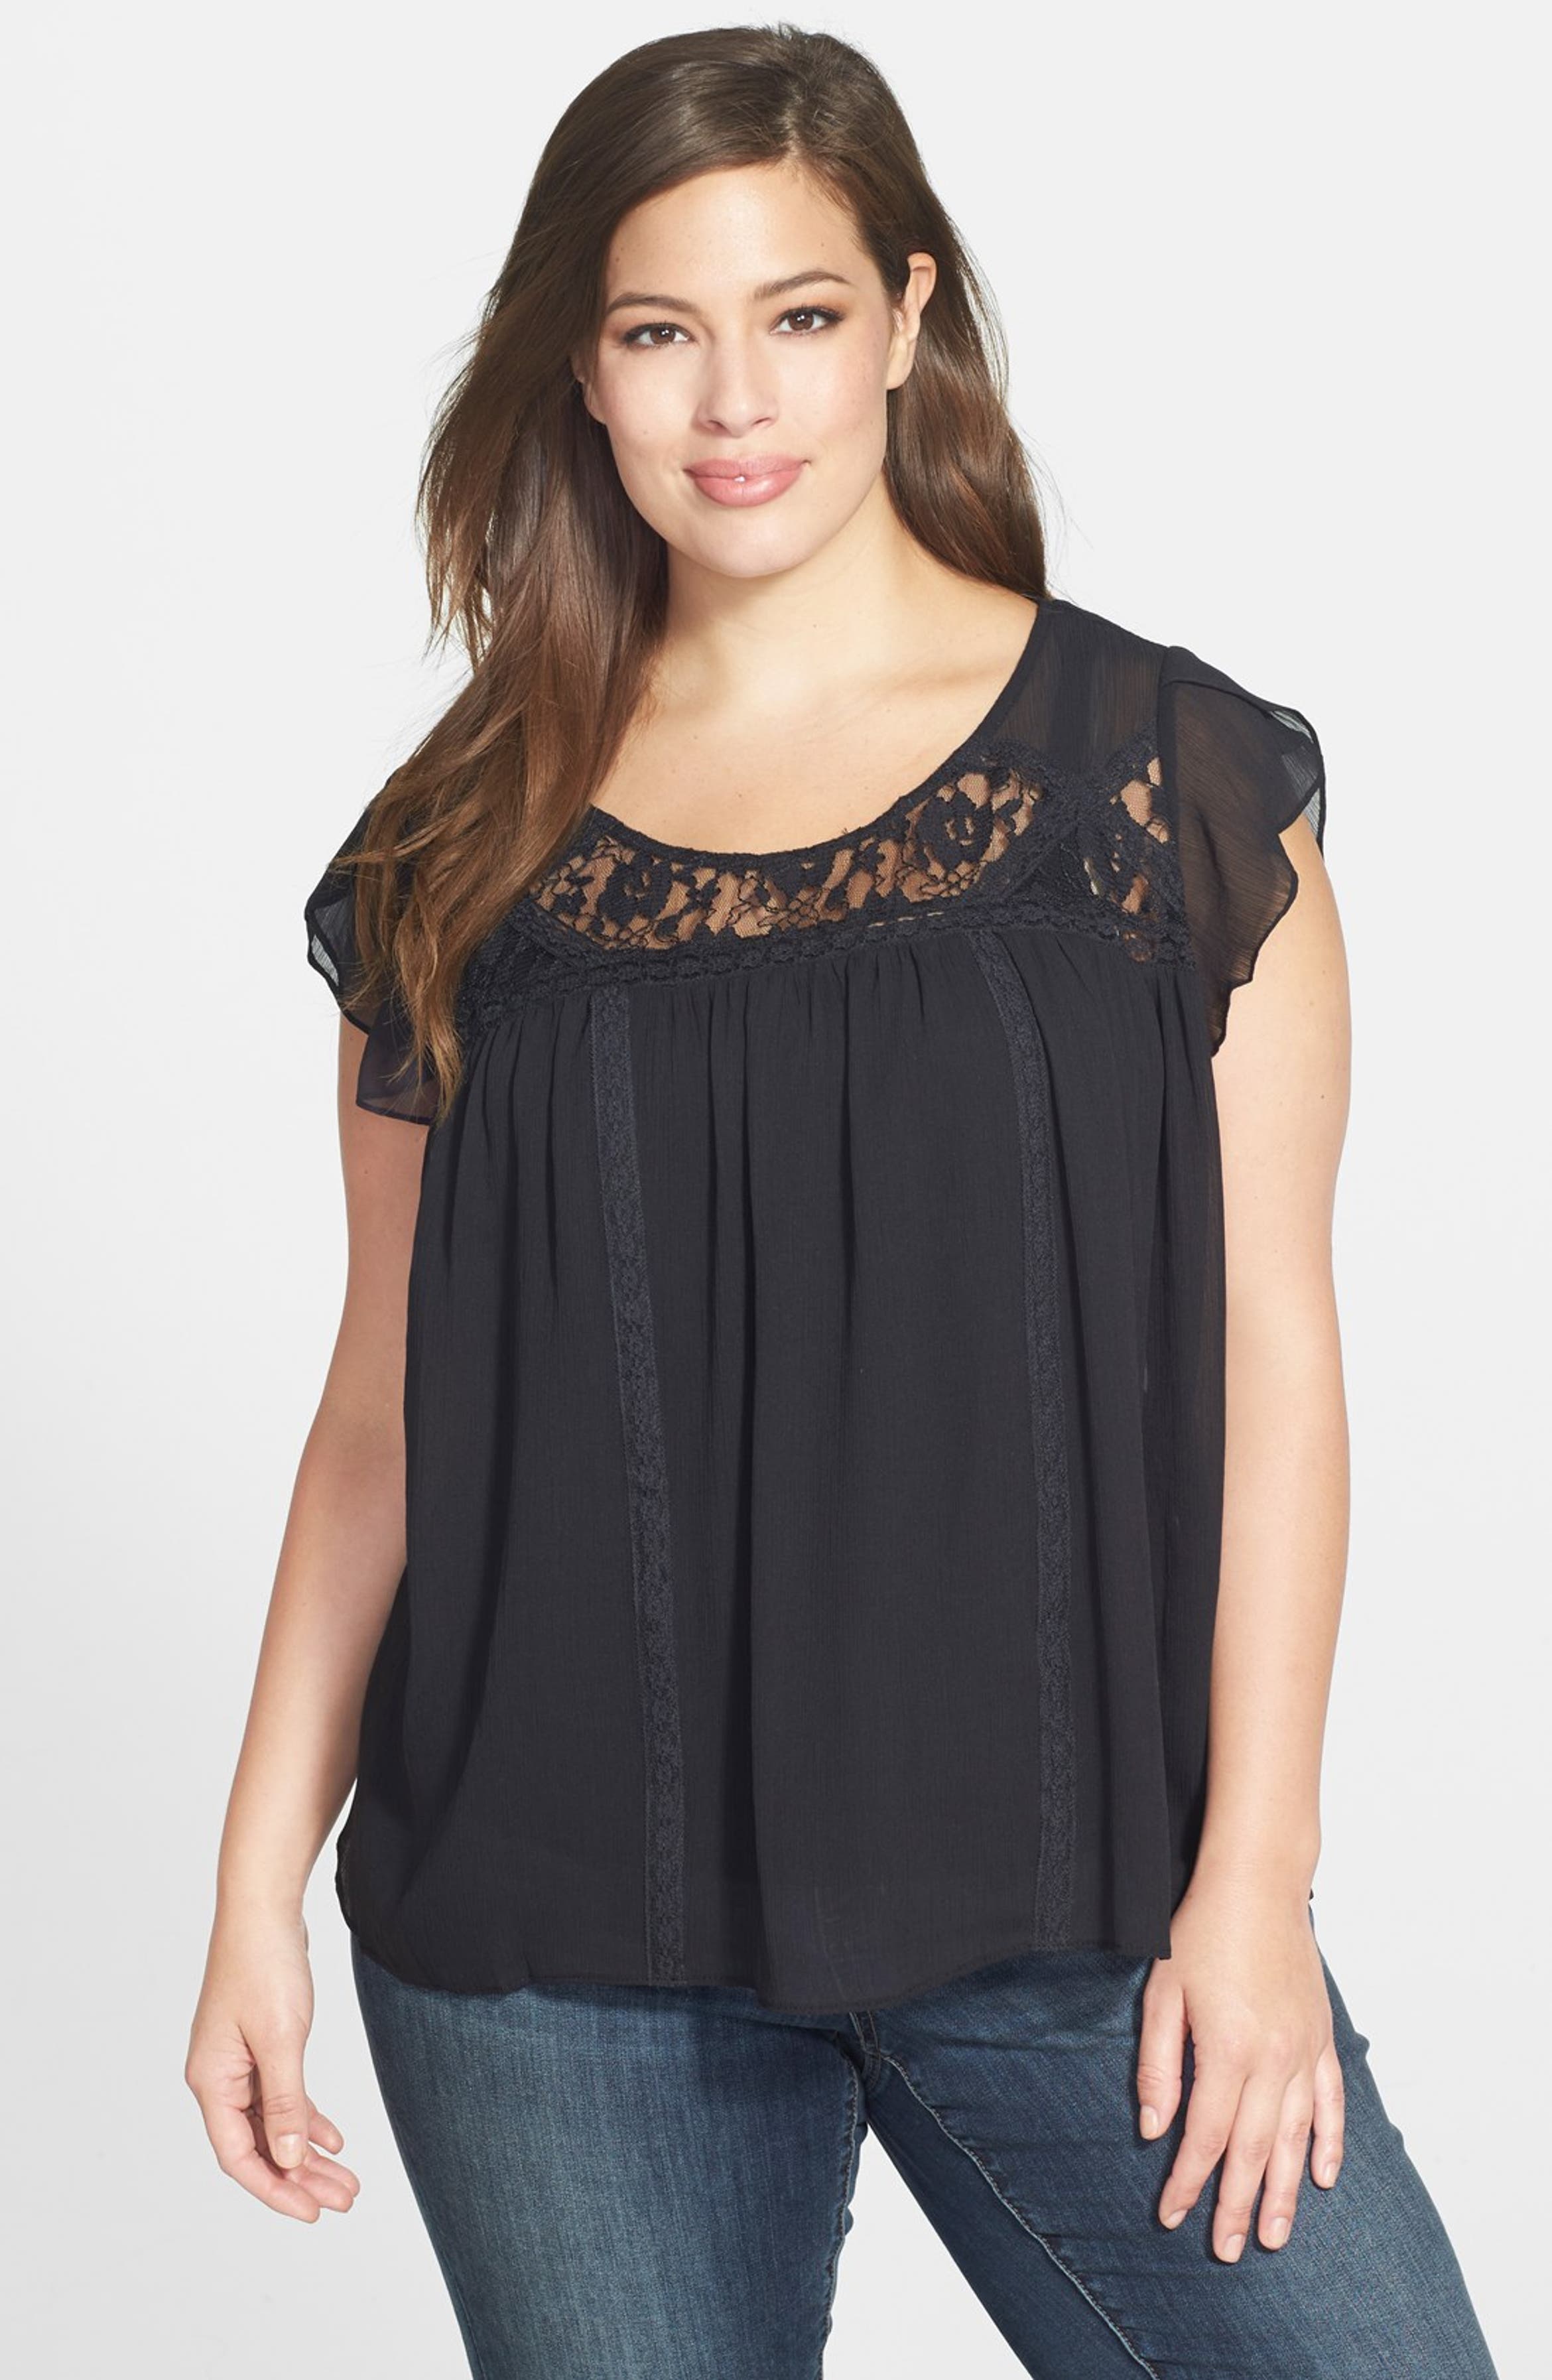 Jessica Simpson 'Clementine' Lace Inset Babydoll Top (Plus Size ...